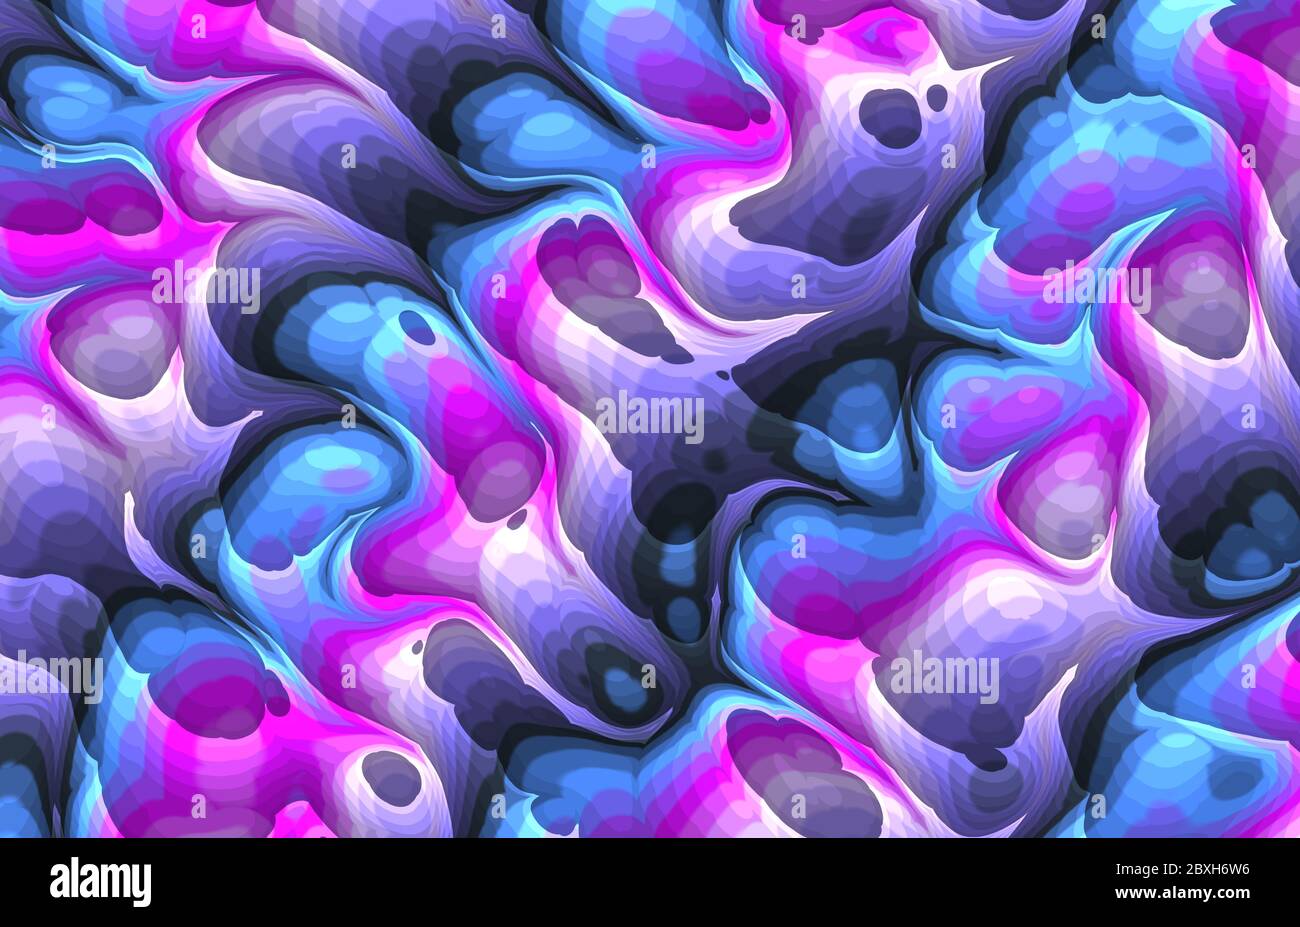 colorful abstract trippy wavy psychodelic pattern Stock Photo